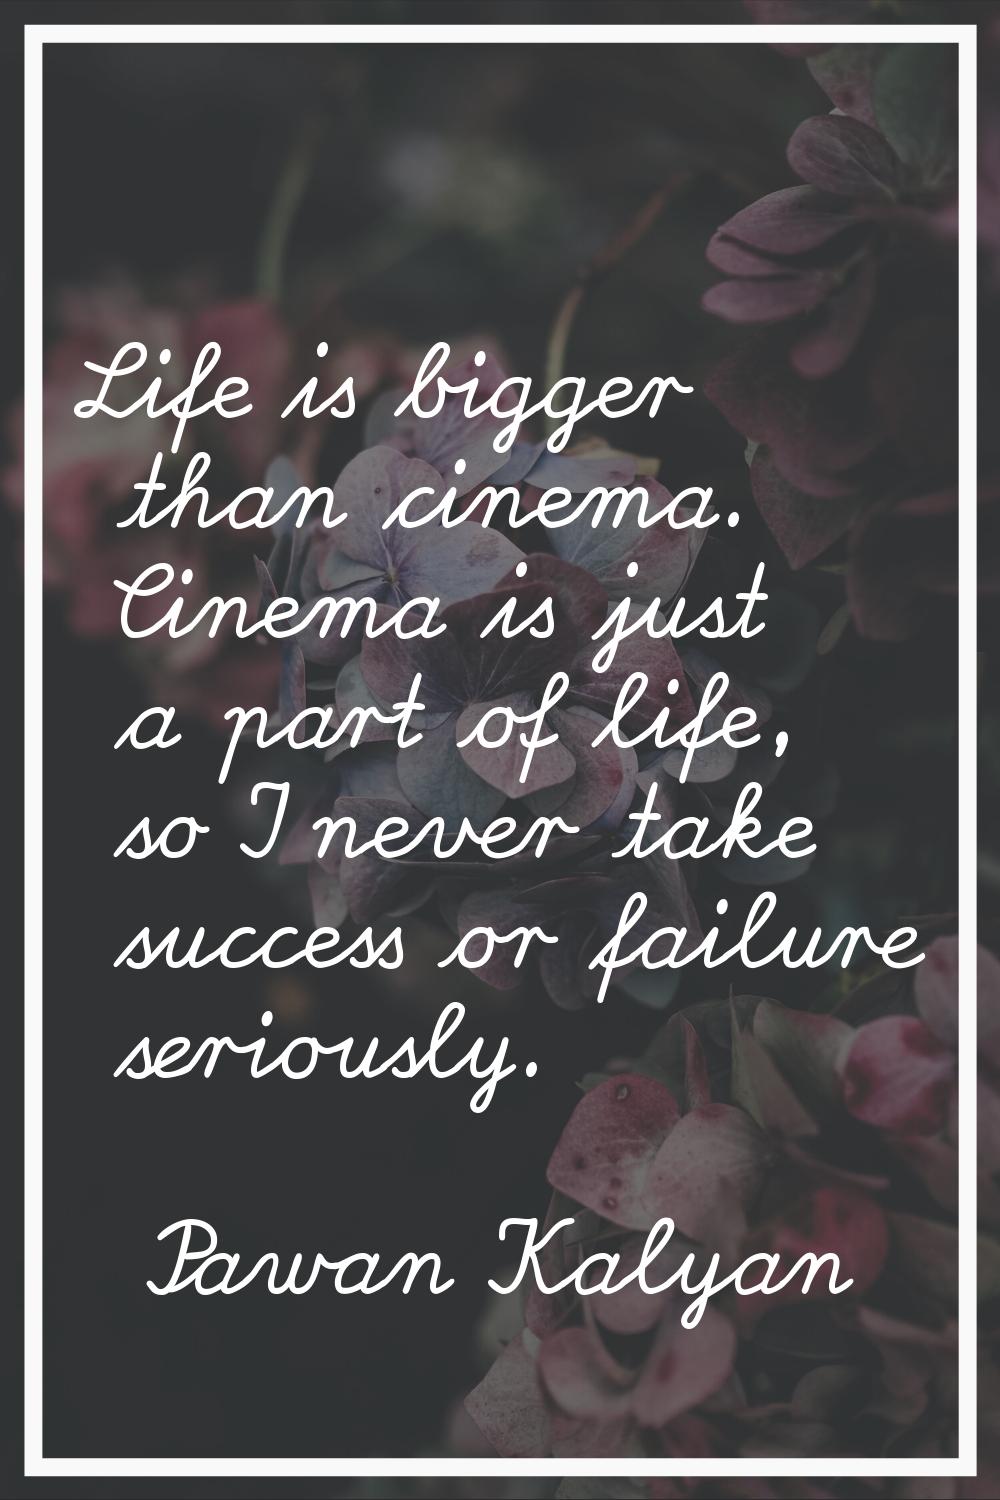 Life is bigger than cinema. Cinema is just a part of life, so I never take success or failure serio